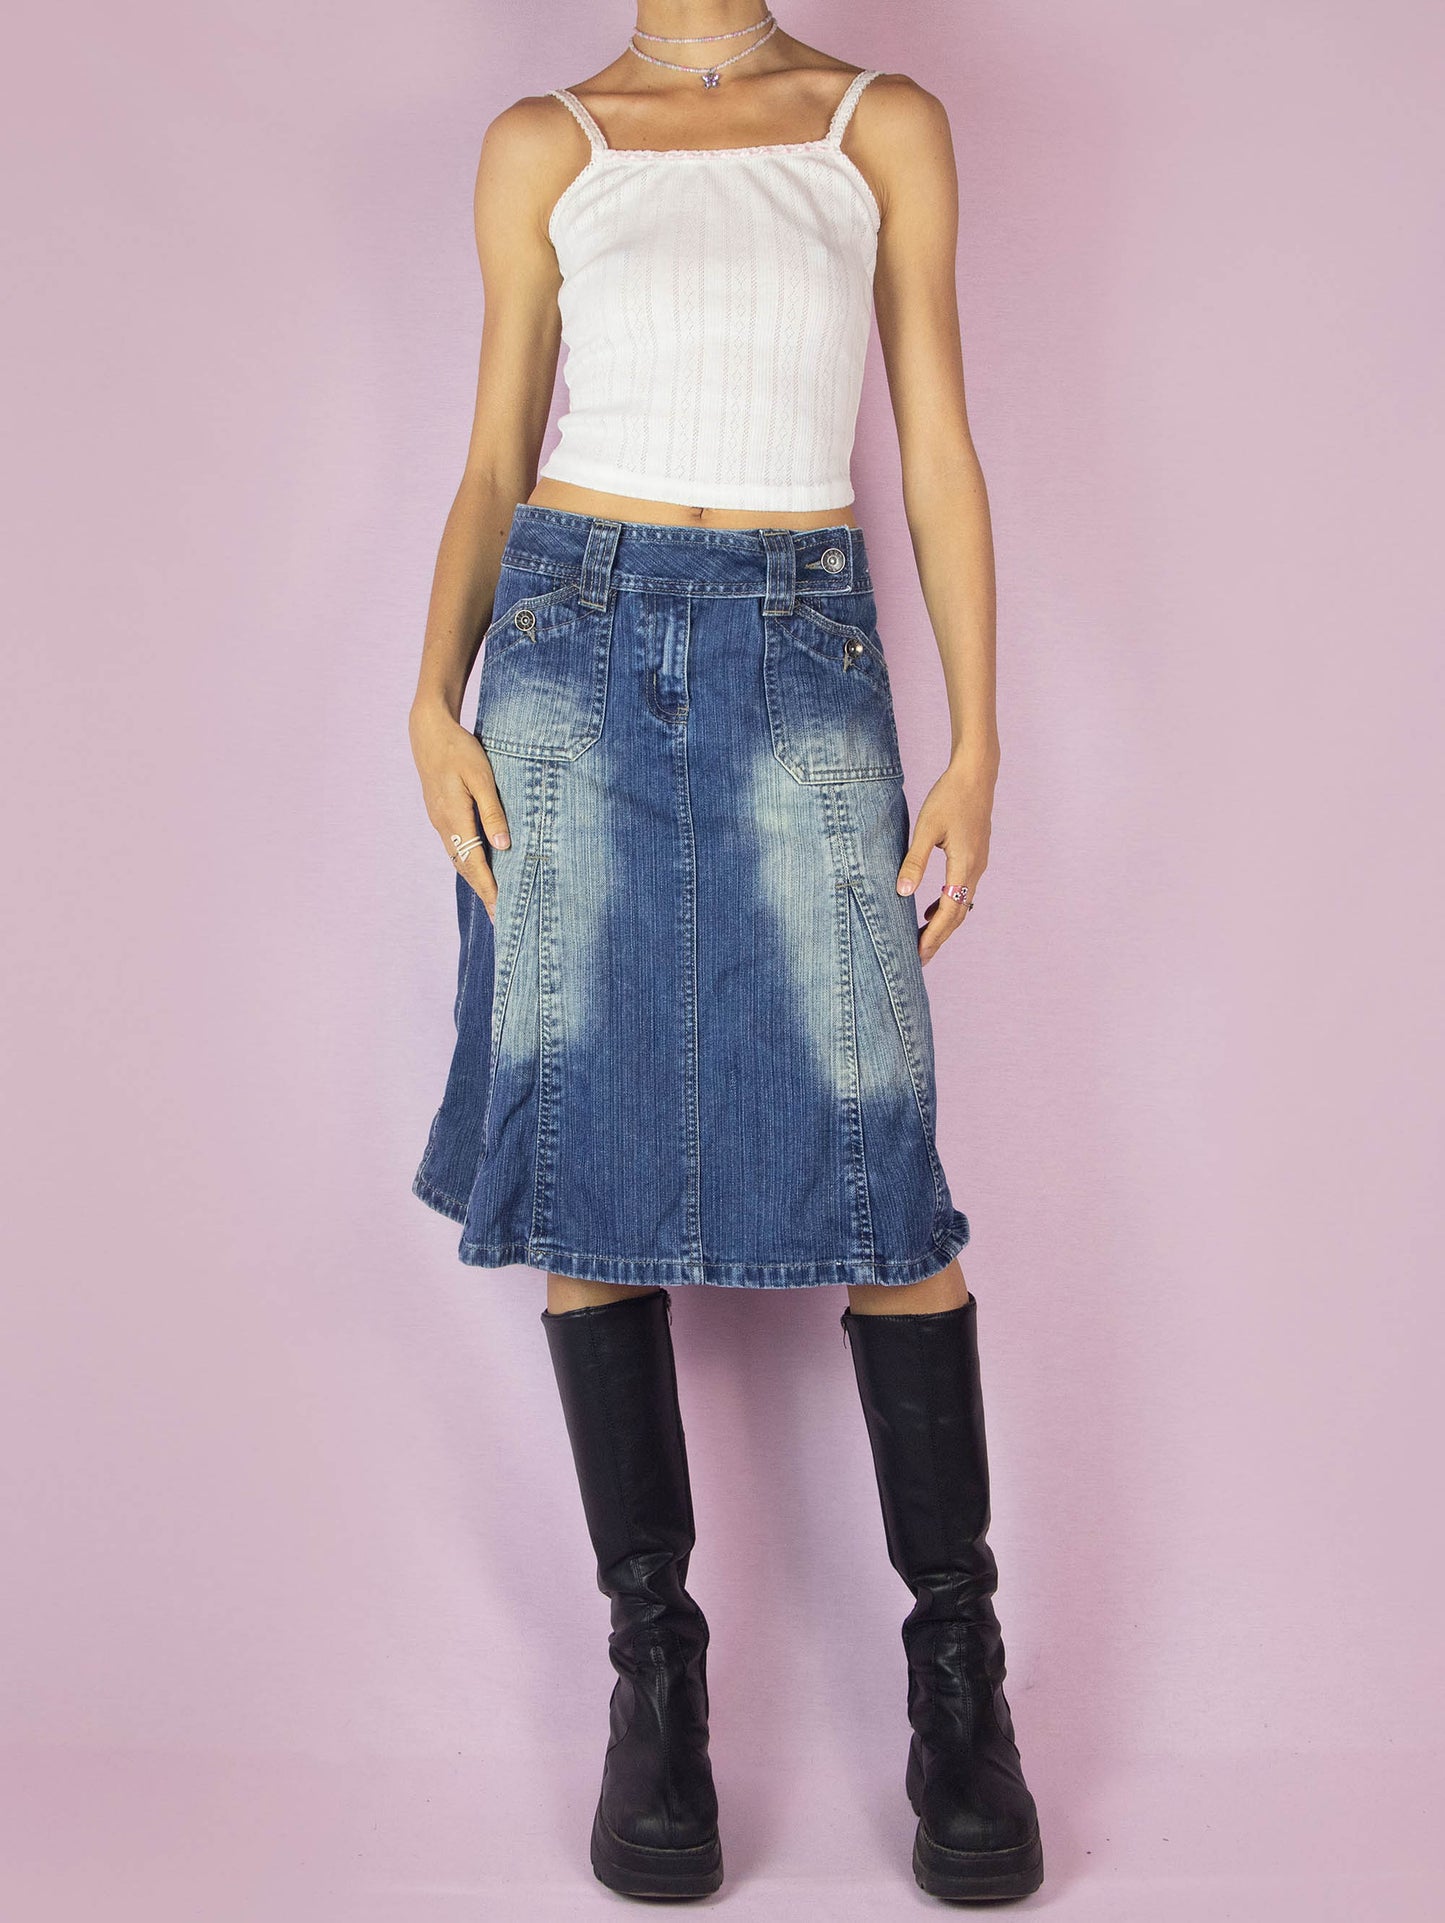 The Y2K Denim Godet A Line Skirt is a vintage 2000s subversive streetwear style jean midi skirt featuring pockets, front zipper closure, and acid wash details.